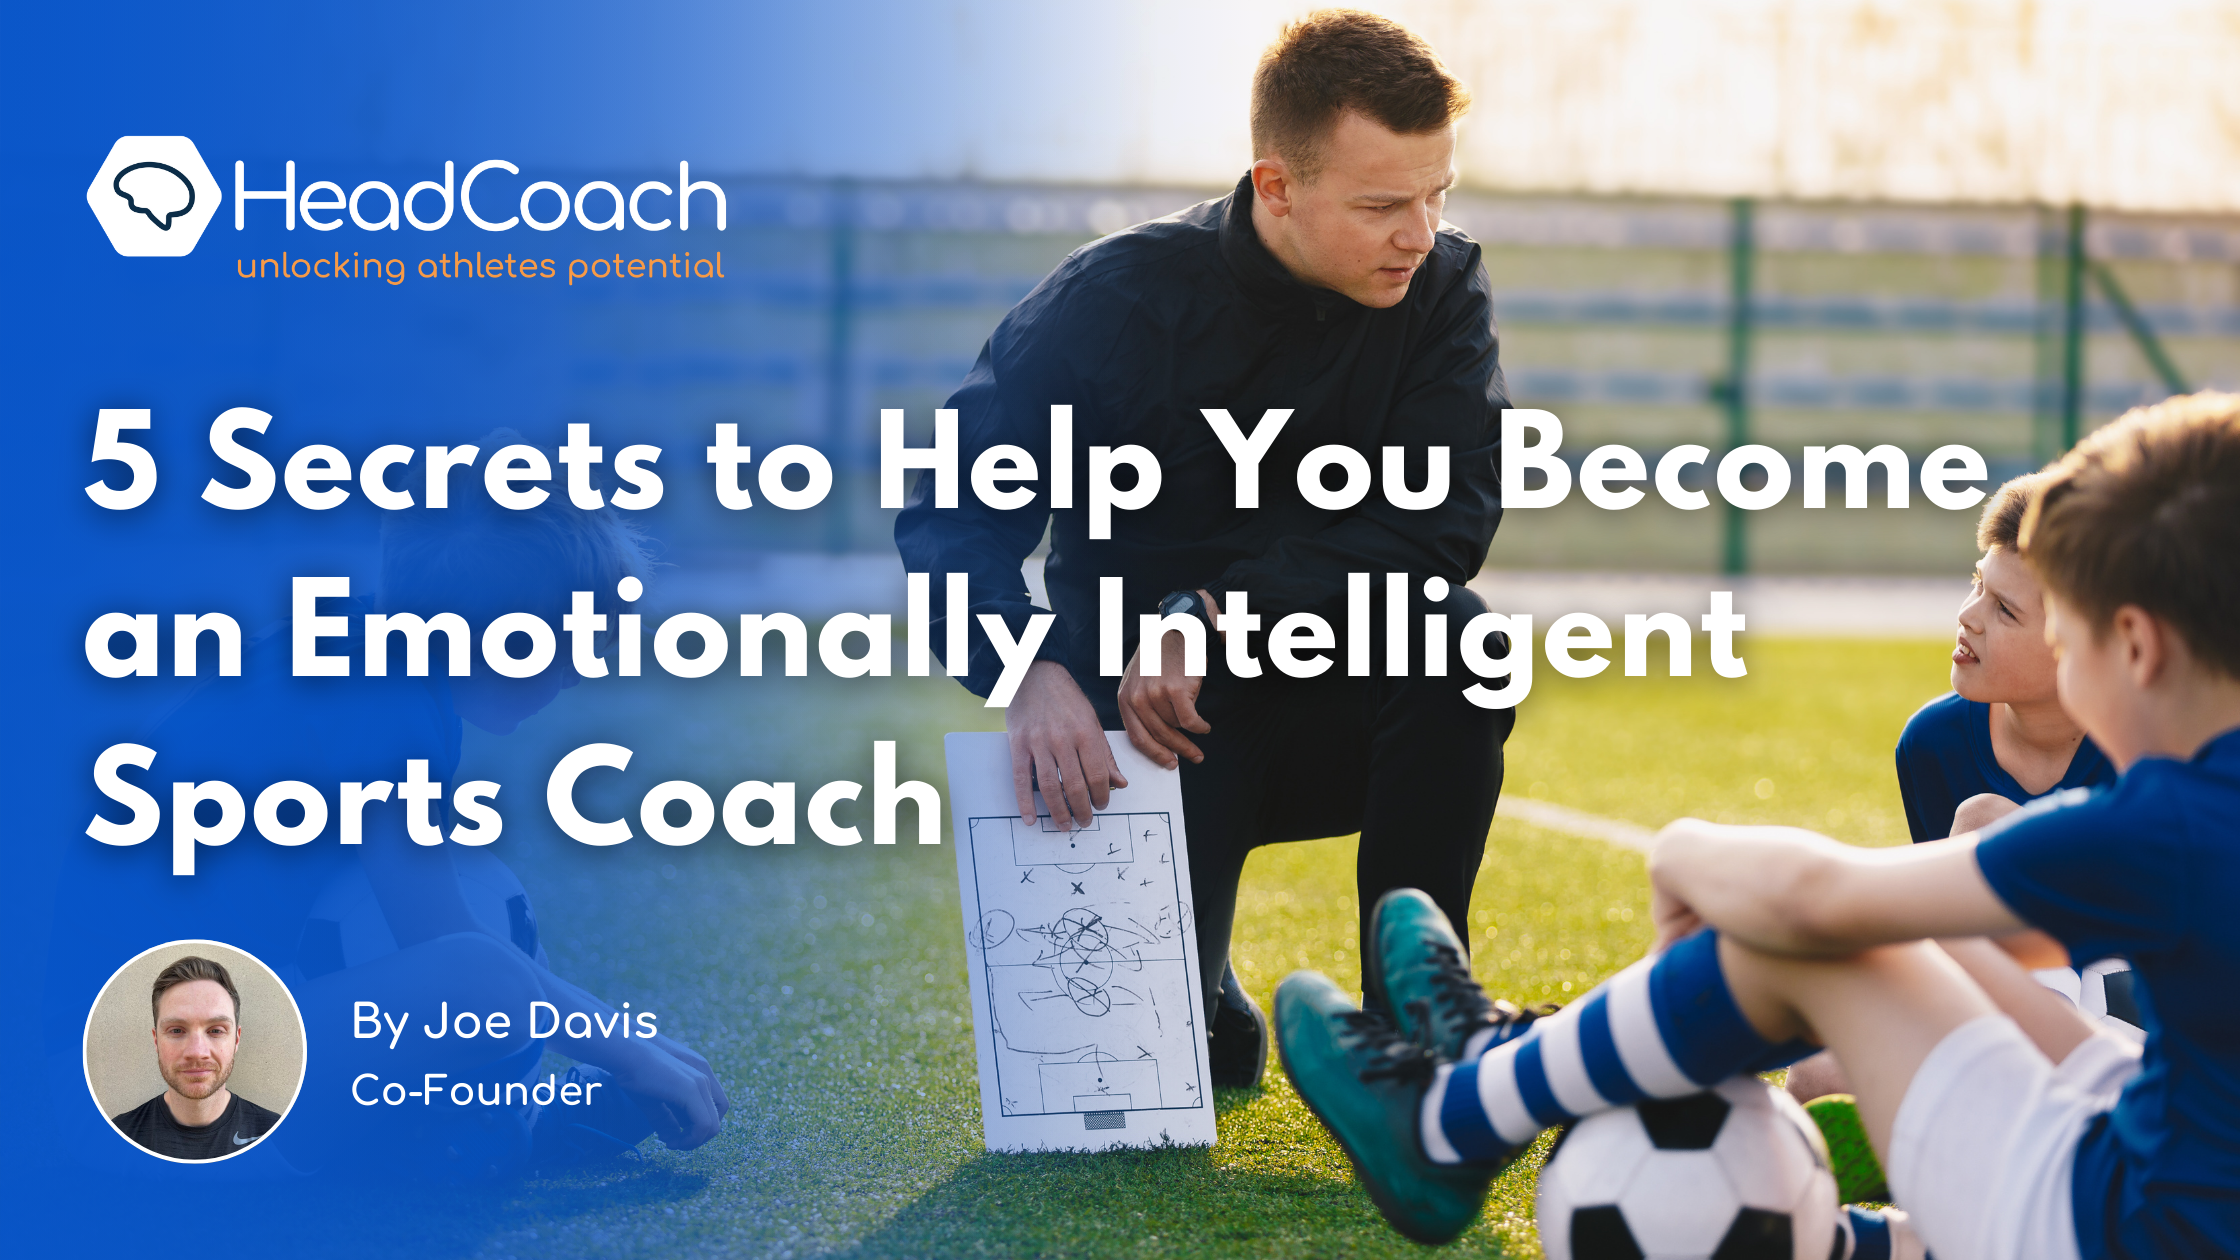 5 Secrets to Help You Become an Emotionally Intelligent Sports Coach